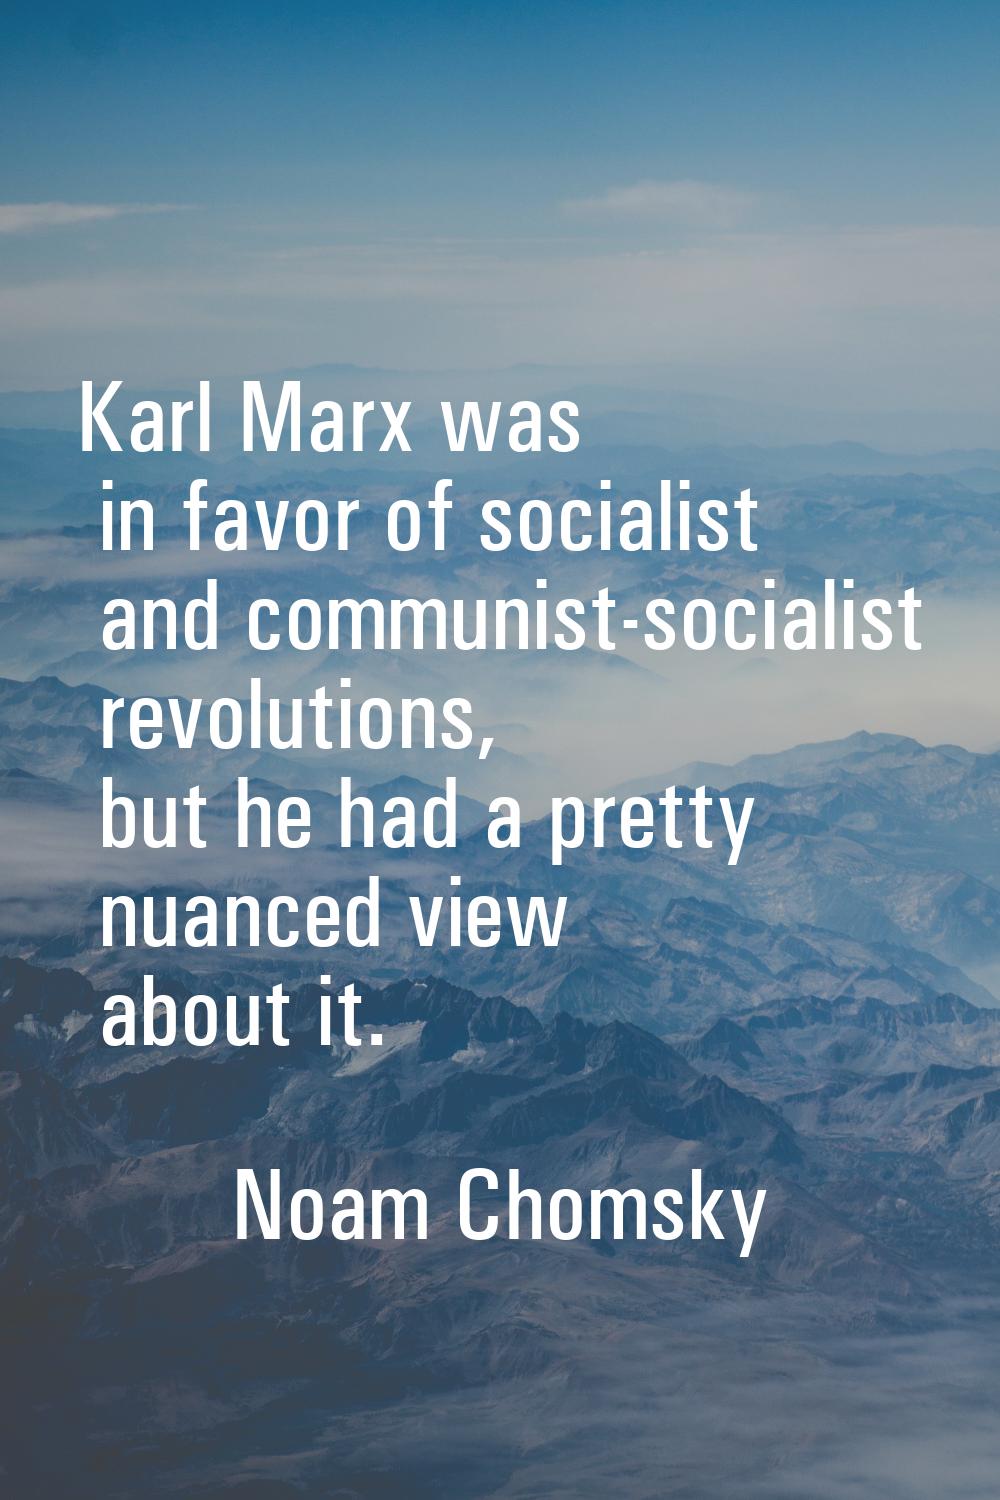 Karl Marx was in favor of socialist and communist-socialist revolutions, but he had a pretty nuance